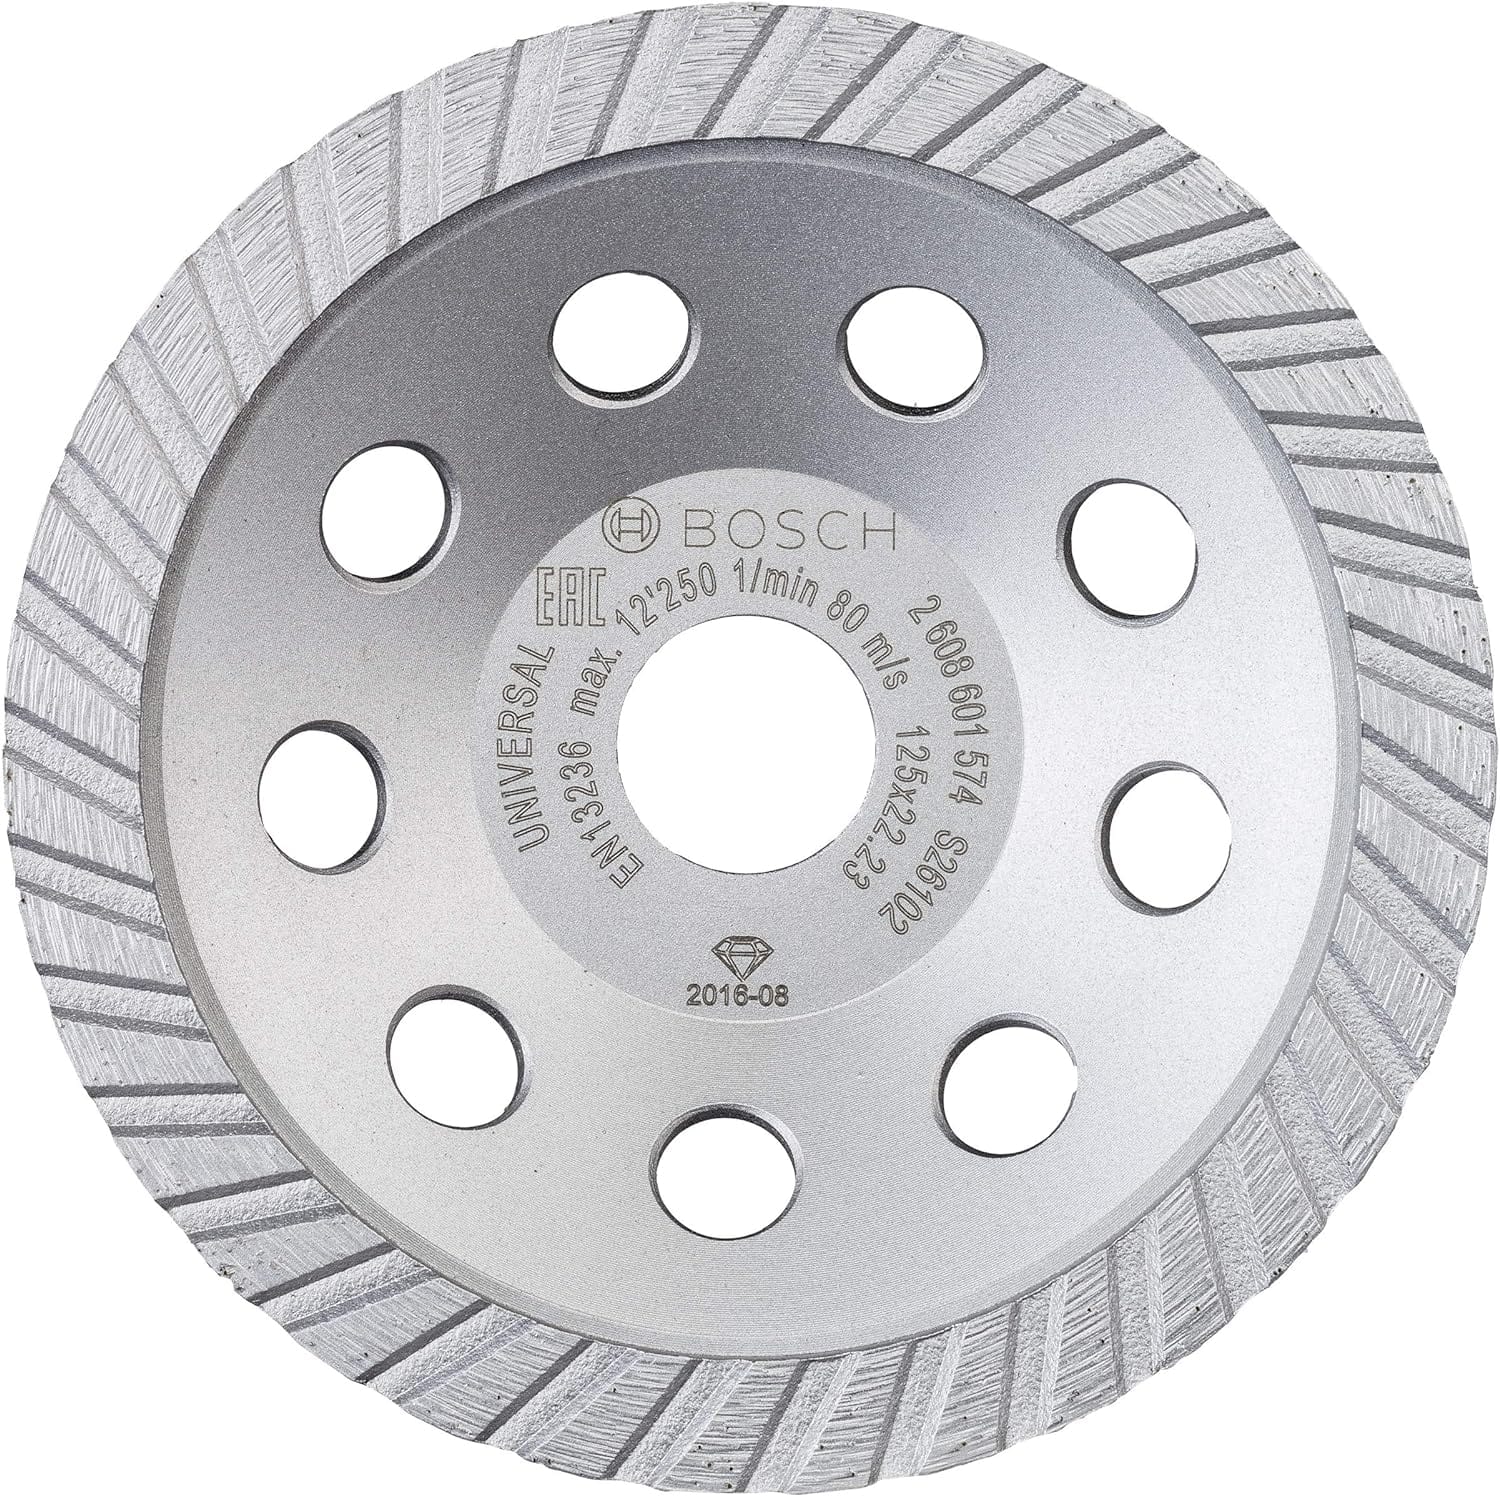 Bosch Segmented Diamond Cup Wheel 125mm | Supply Master, Accra, Ghana Grinding & Cutting Wheels Buy Tools hardware Building materials